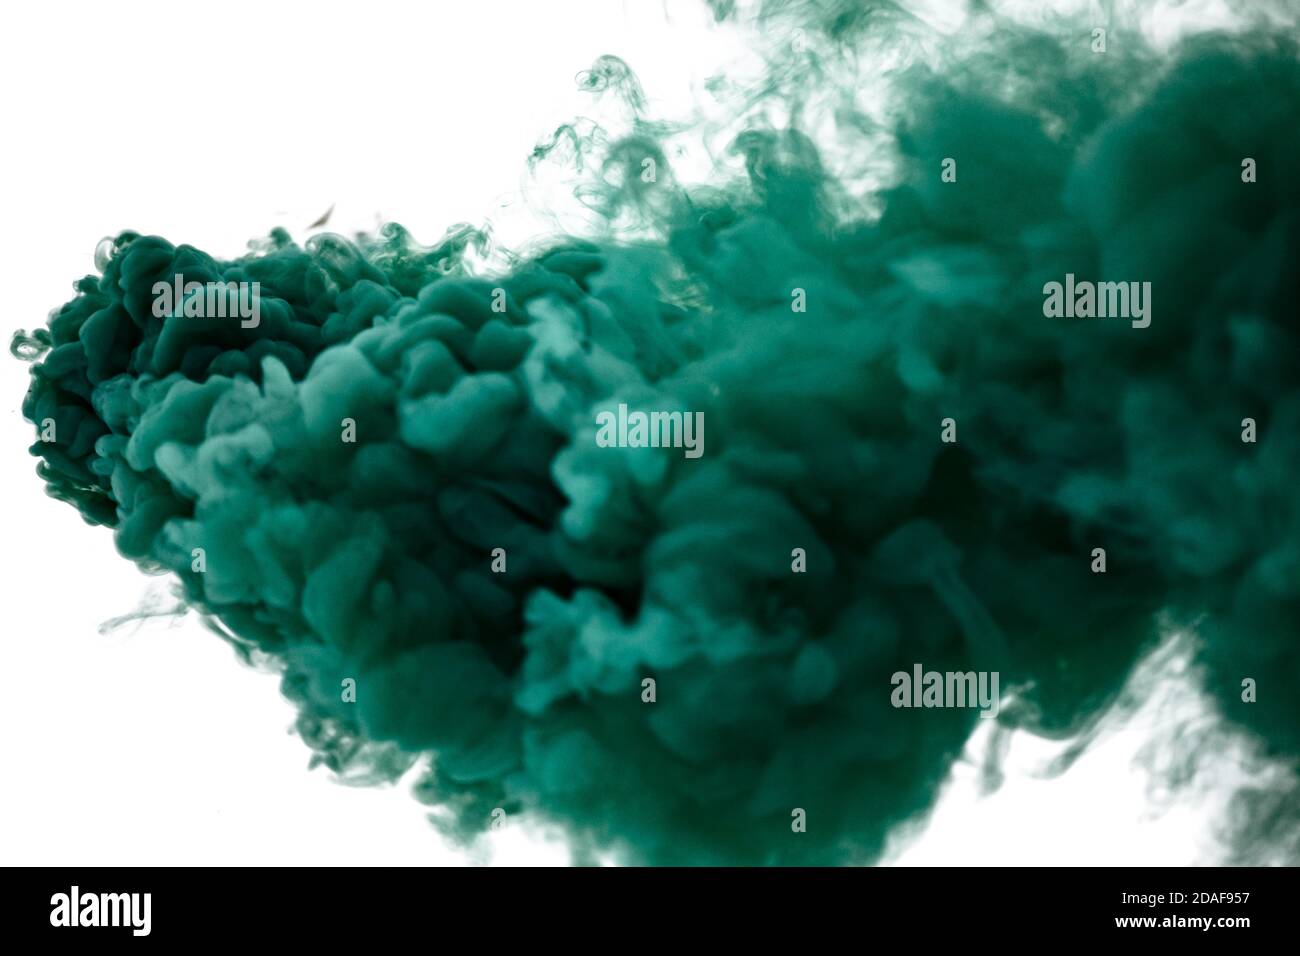 Burning fuse. Dynamite firecracker green fuse burn with sparkles and smoke  on black background. Stock Photo